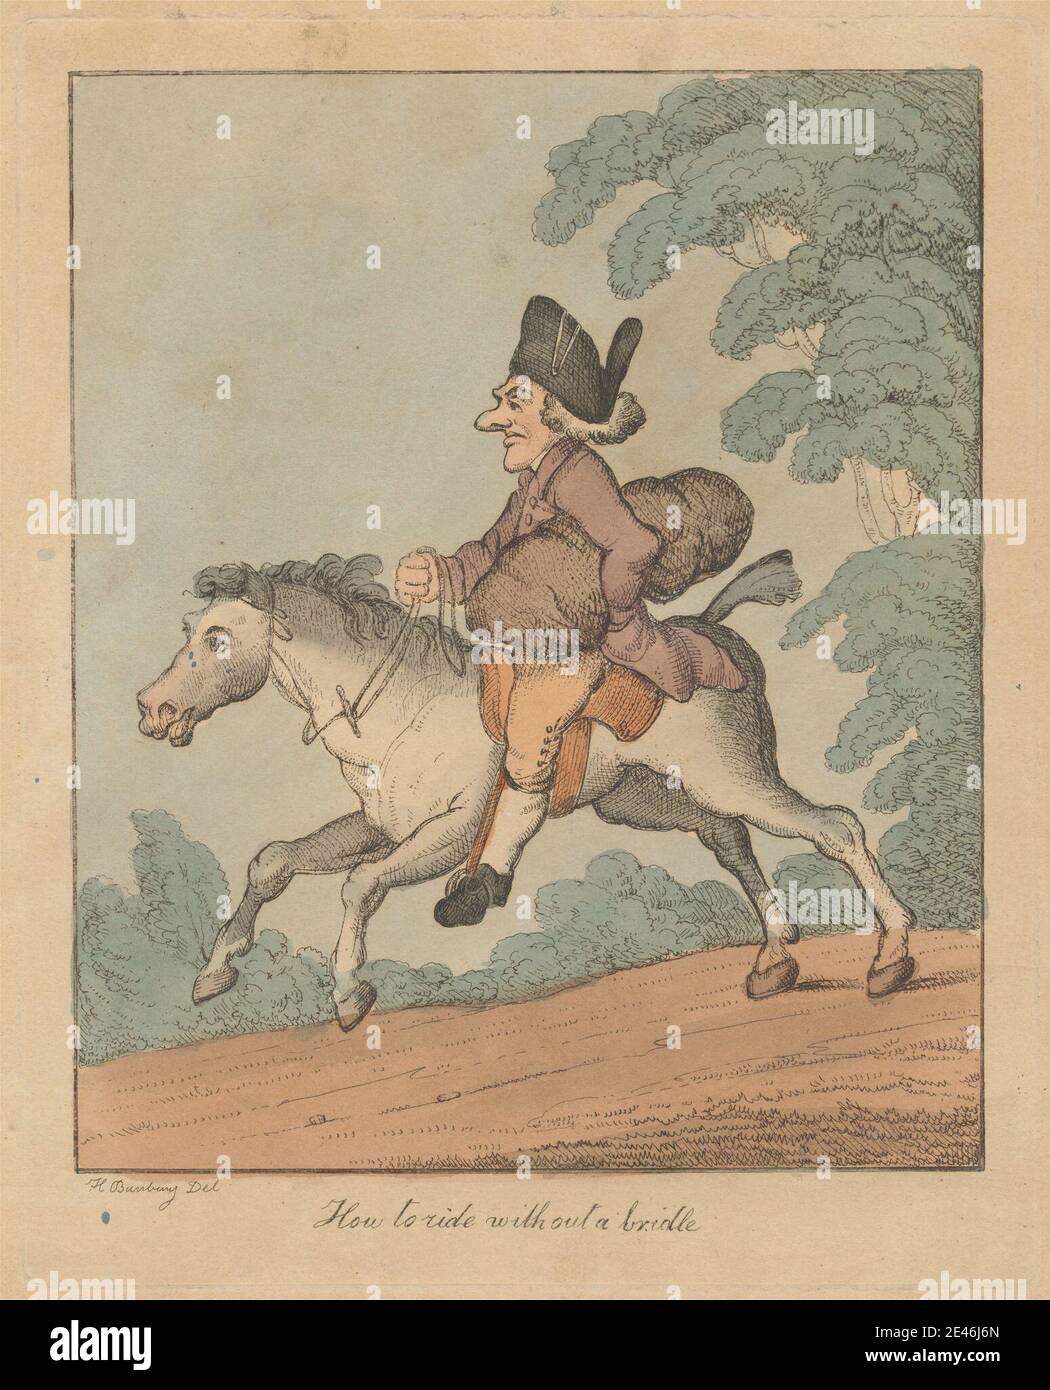 Print made by Henry William Bunbury, 1750â€“1811, British, How to Ride Without a Bridle, undated. Hand-colored etching on thick beige card.   bridle , bundle , caricature , coat , genre subject , hat , horse (animal) , man , nose , riding , road , saddle , satire , trees Stock Photo